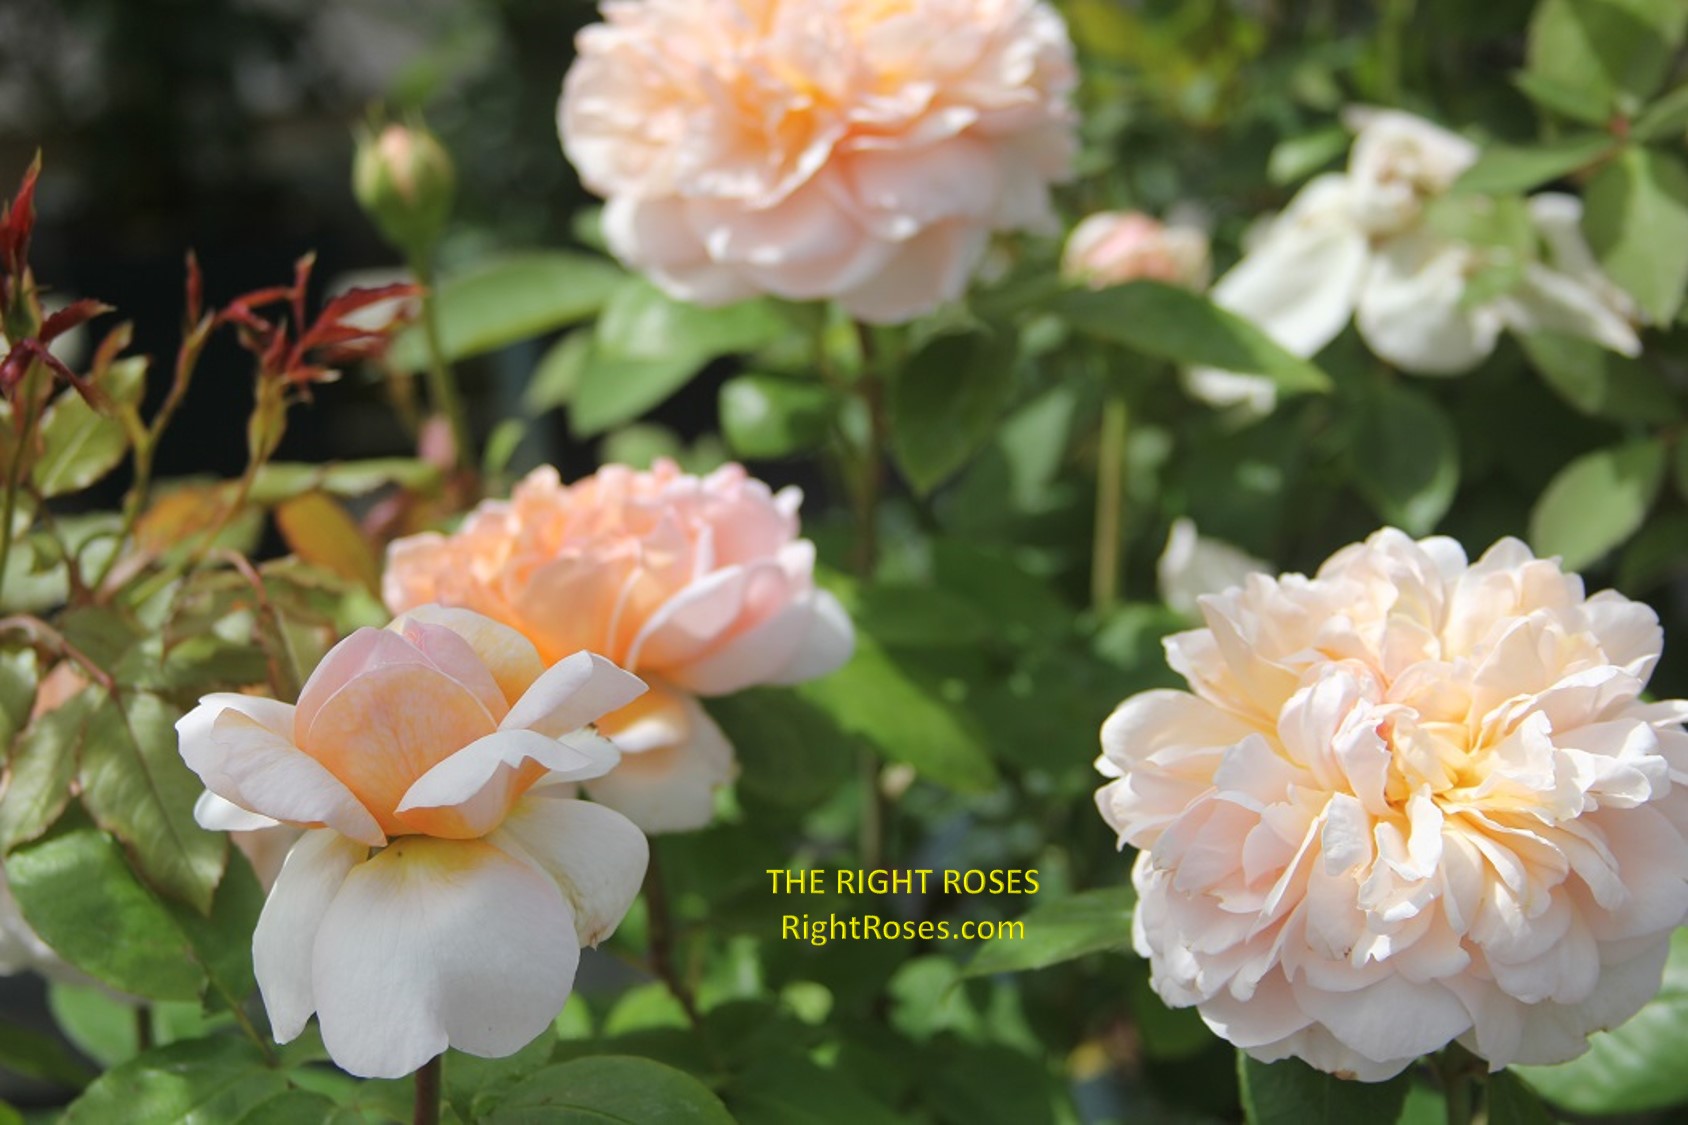 the lady gardener rose review the right roses score best top garden store david austin english roses rose products rose rating the right leap rose food fertilizer